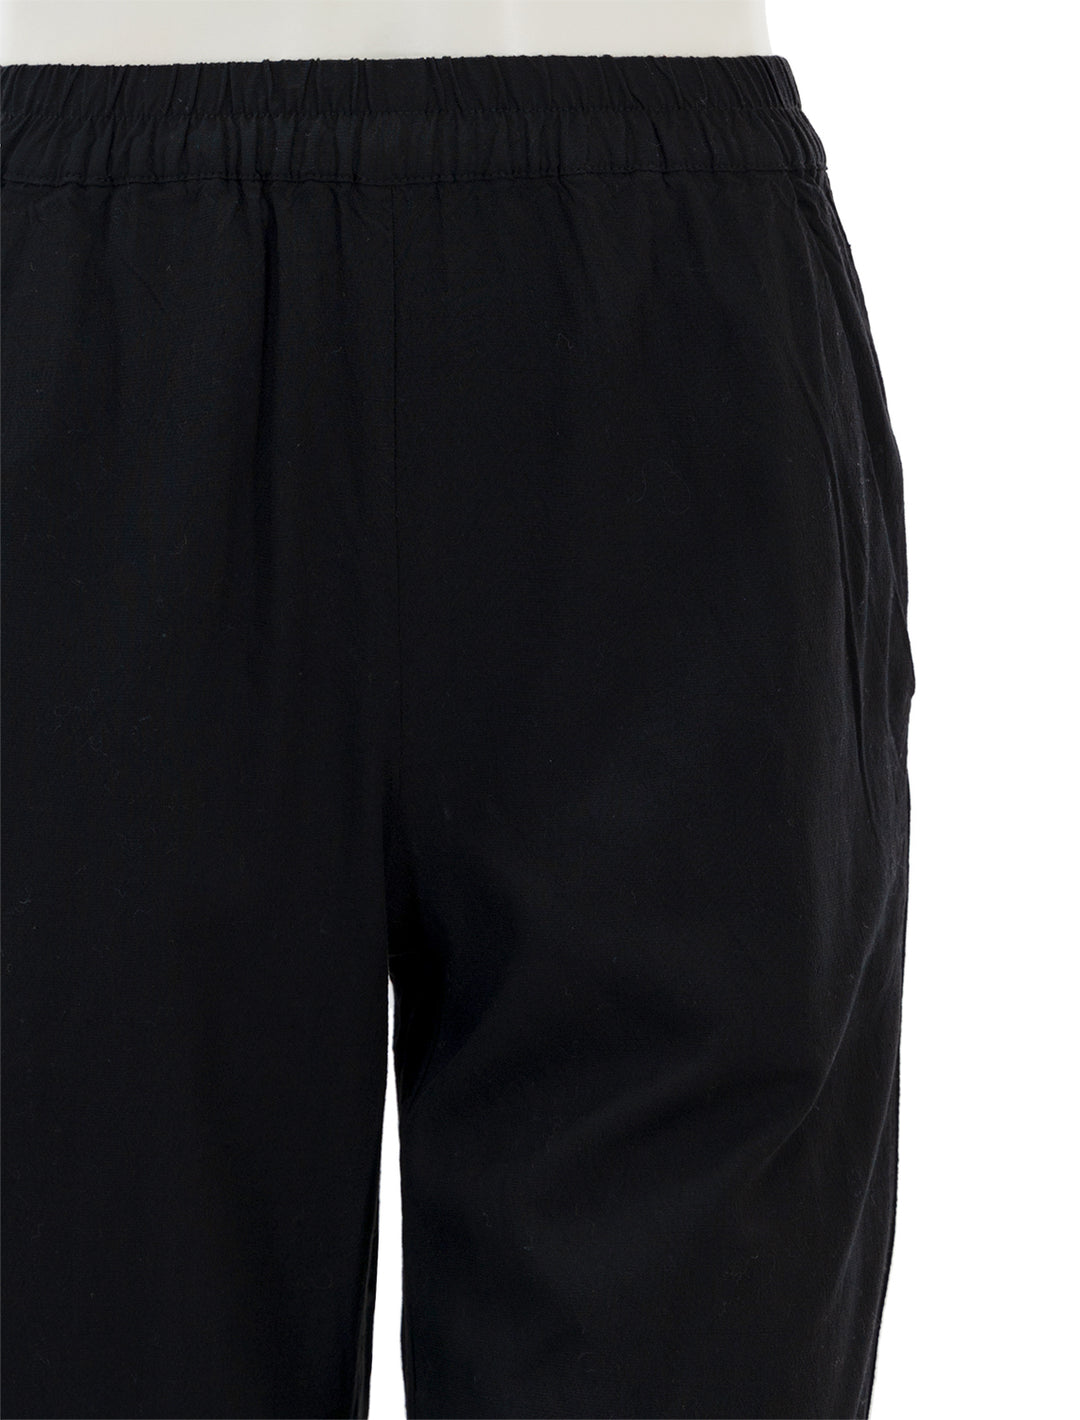 Close-up view of Marine Layer's wide leg allison pant in black.